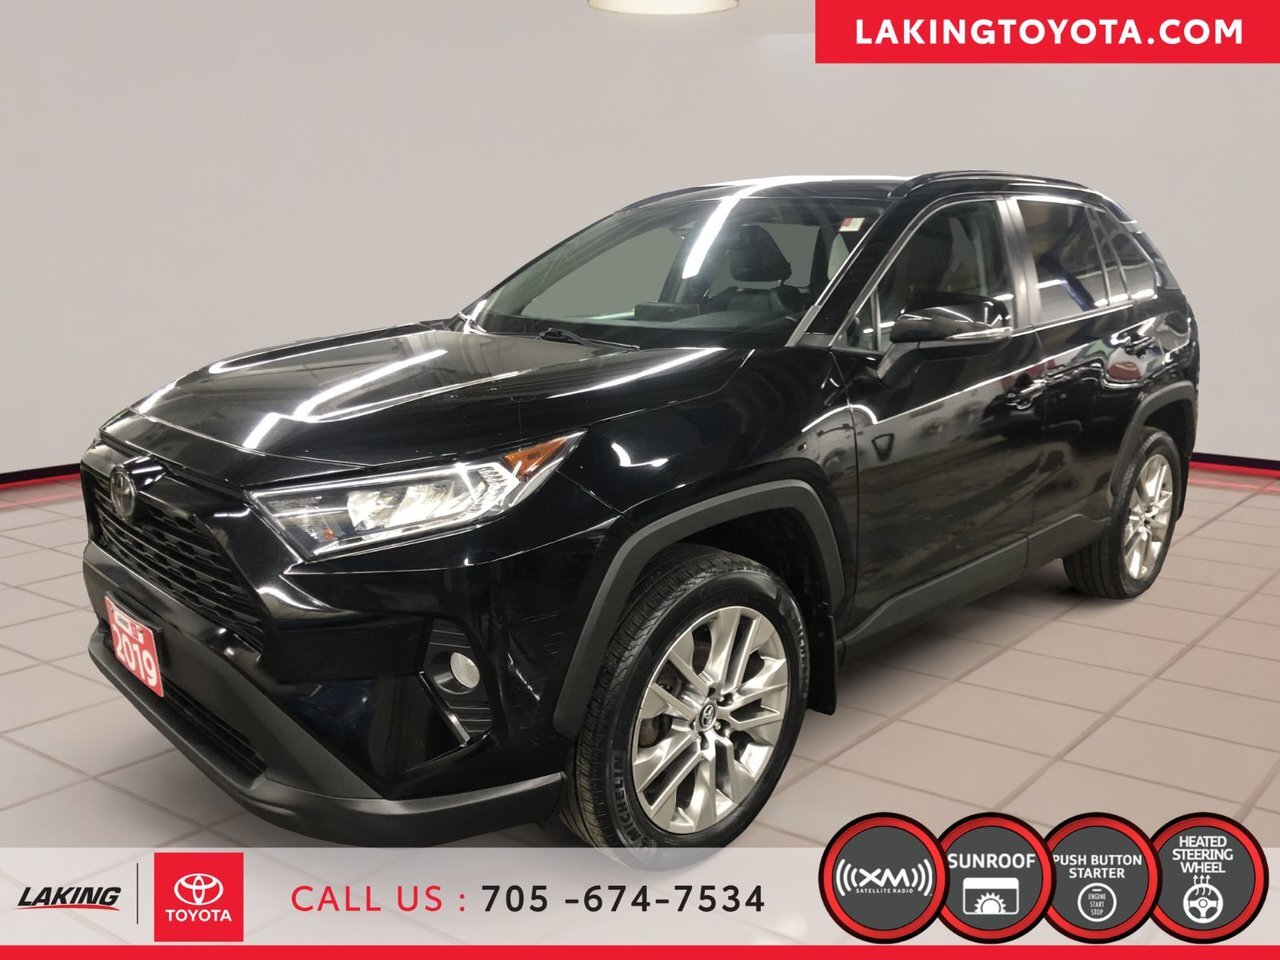 2019 Toyota RAV4 XLE All Wheel Drive The nearest this to a perfect 